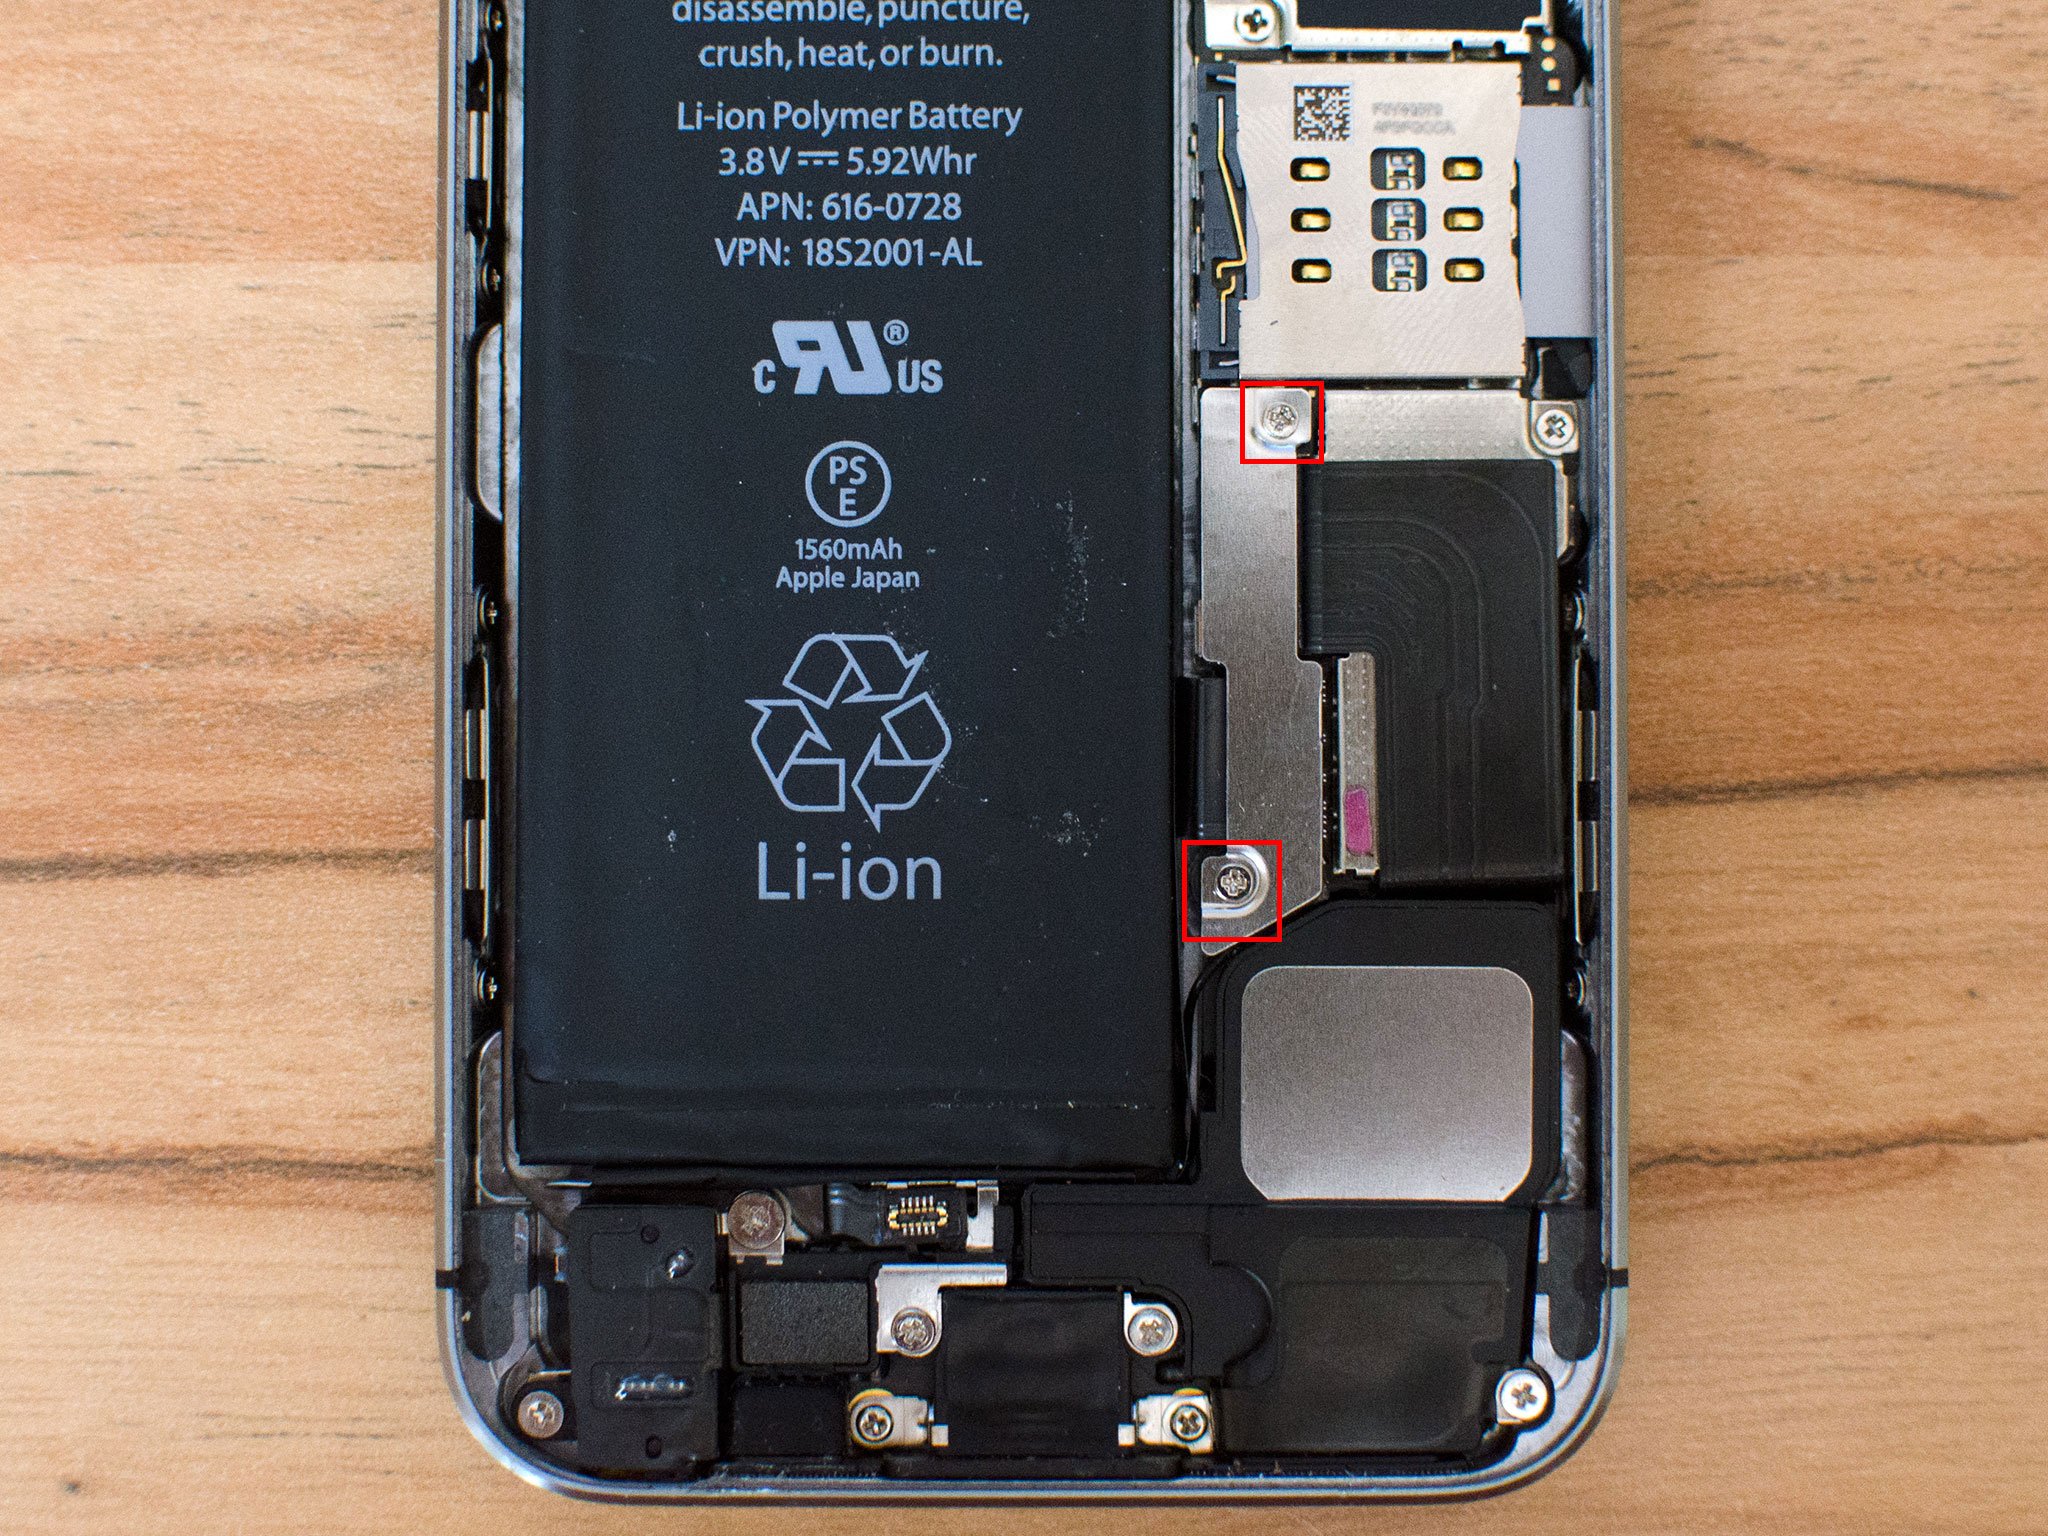 Iphone 5 battery drains fast